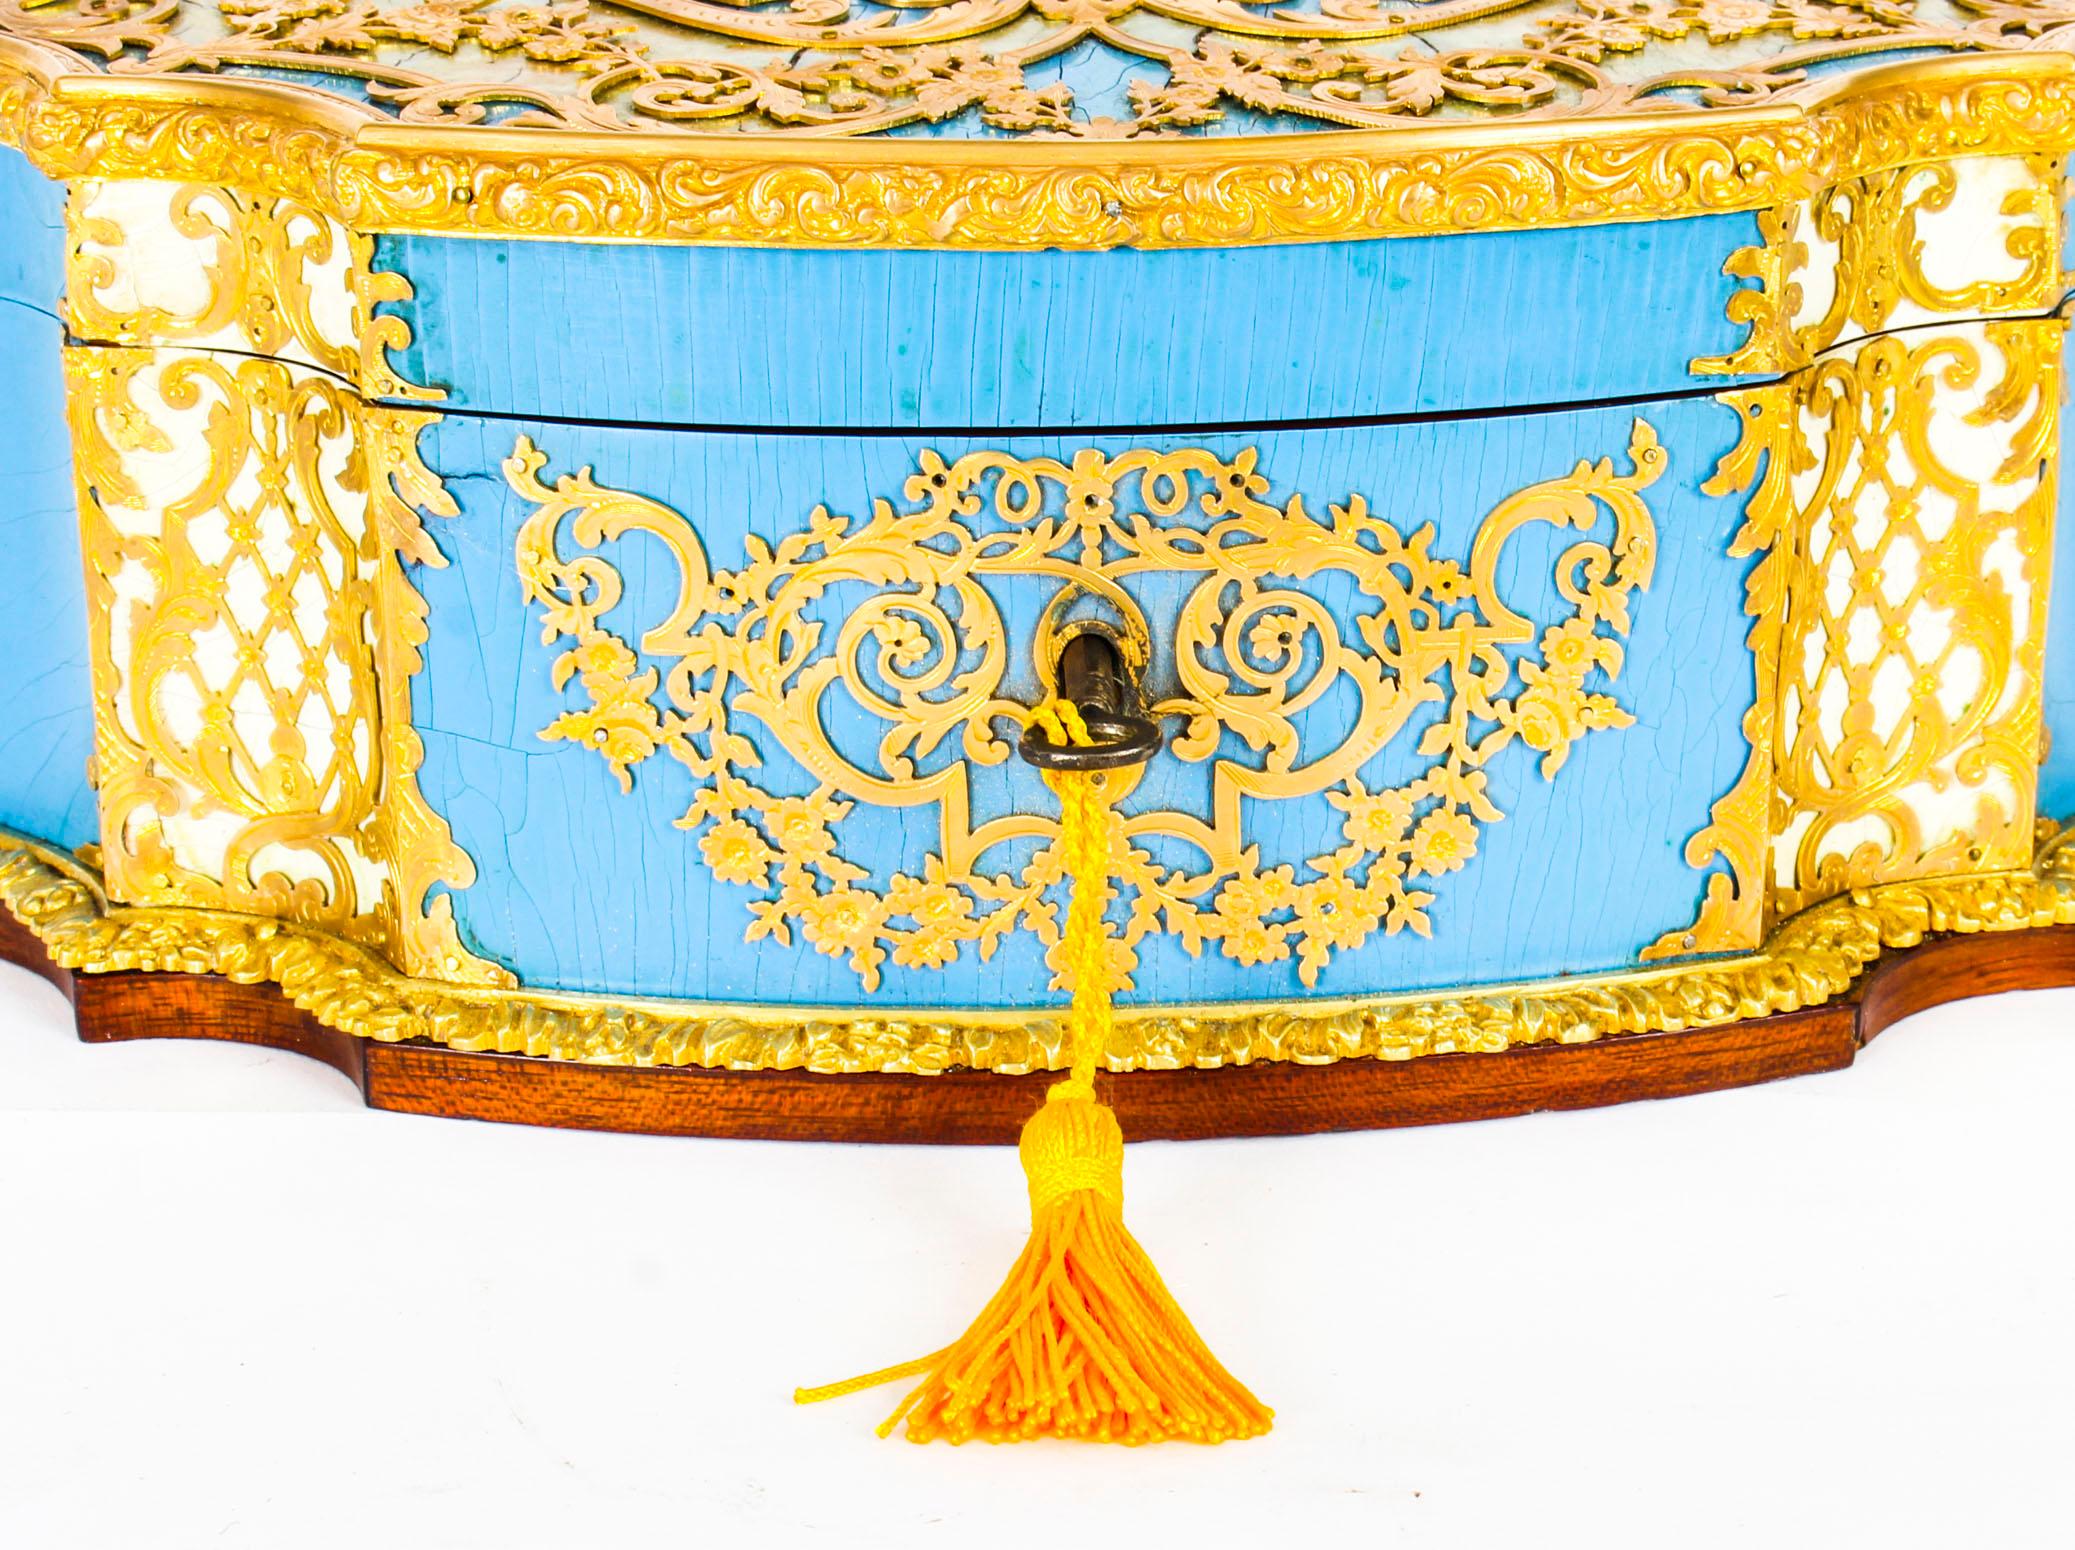 Mid-19th Century Antique French Enamel Ormolu and Mother of Pearl Jewelry Casket, 19th Century